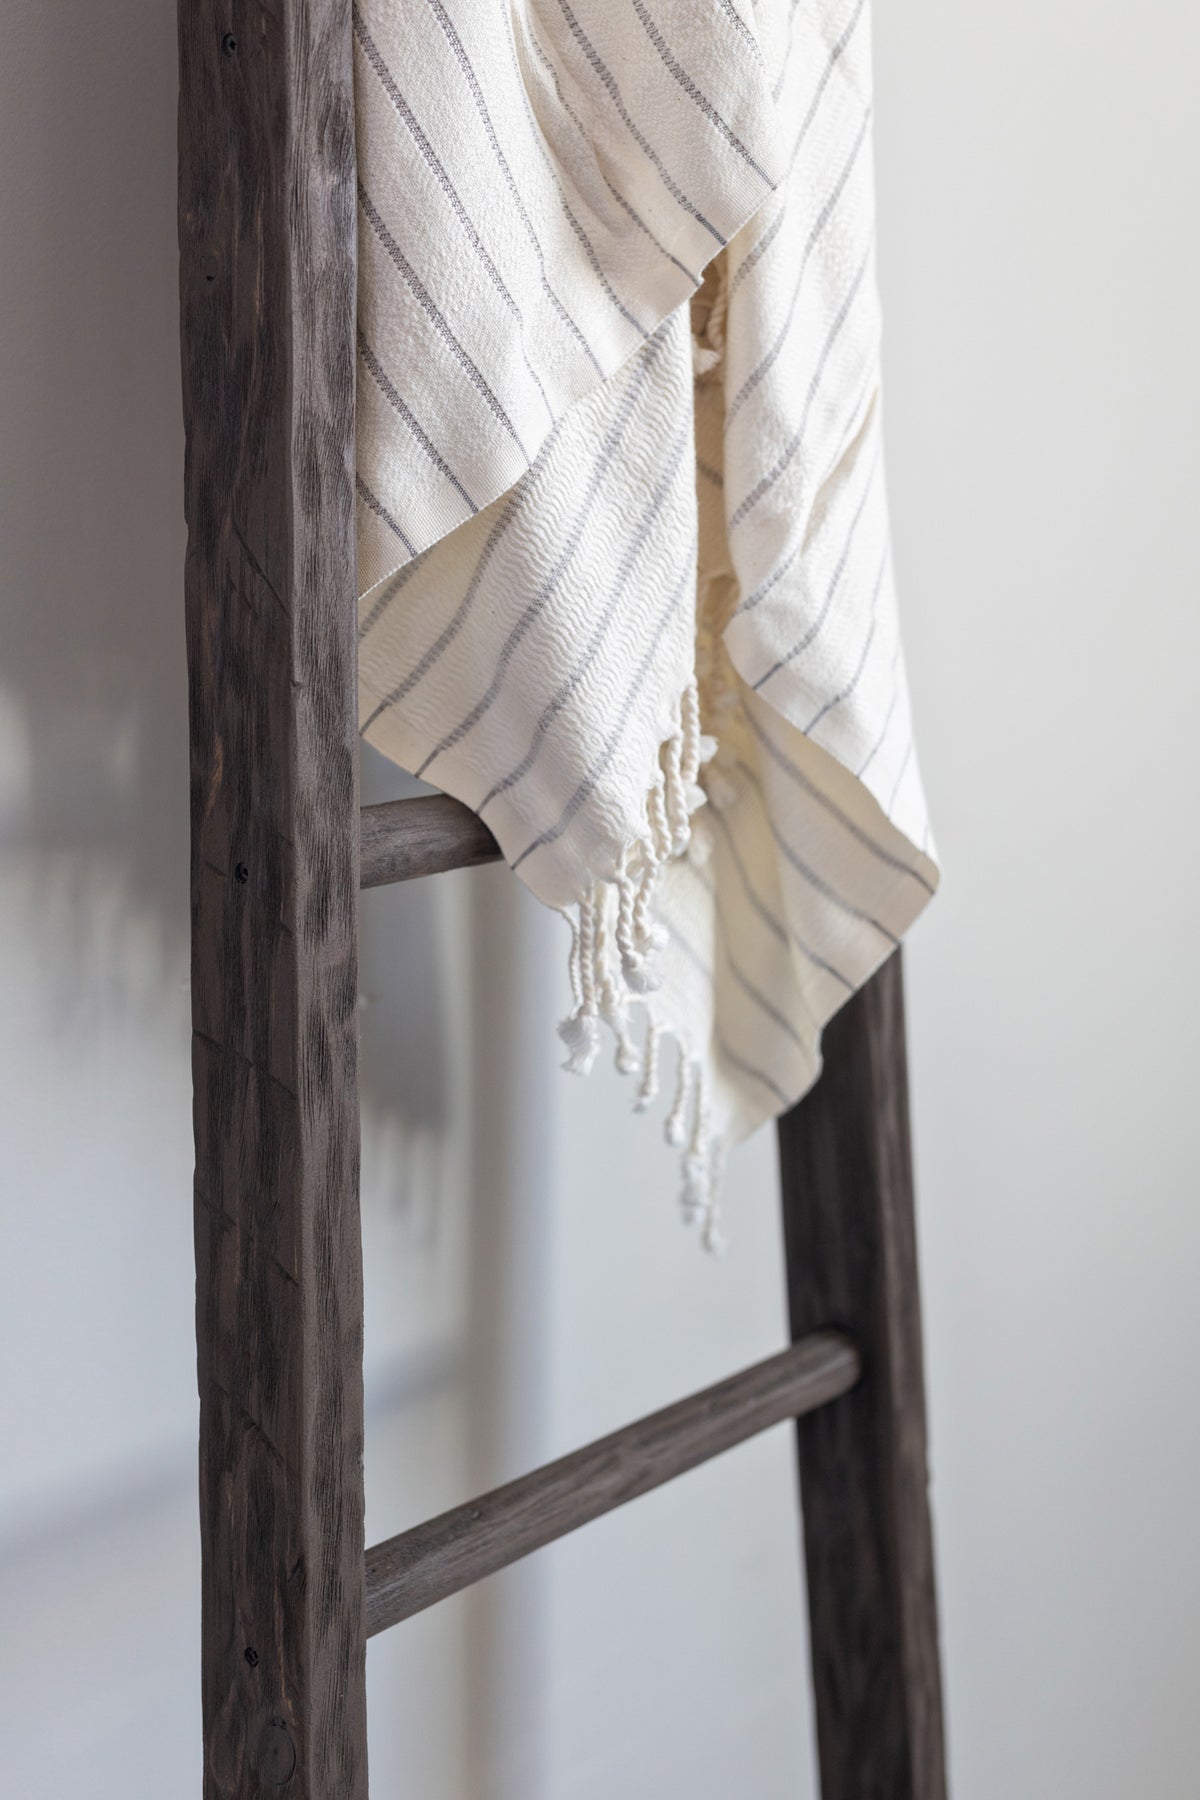 Farmhouse Blanket Ladder with Blanket close up